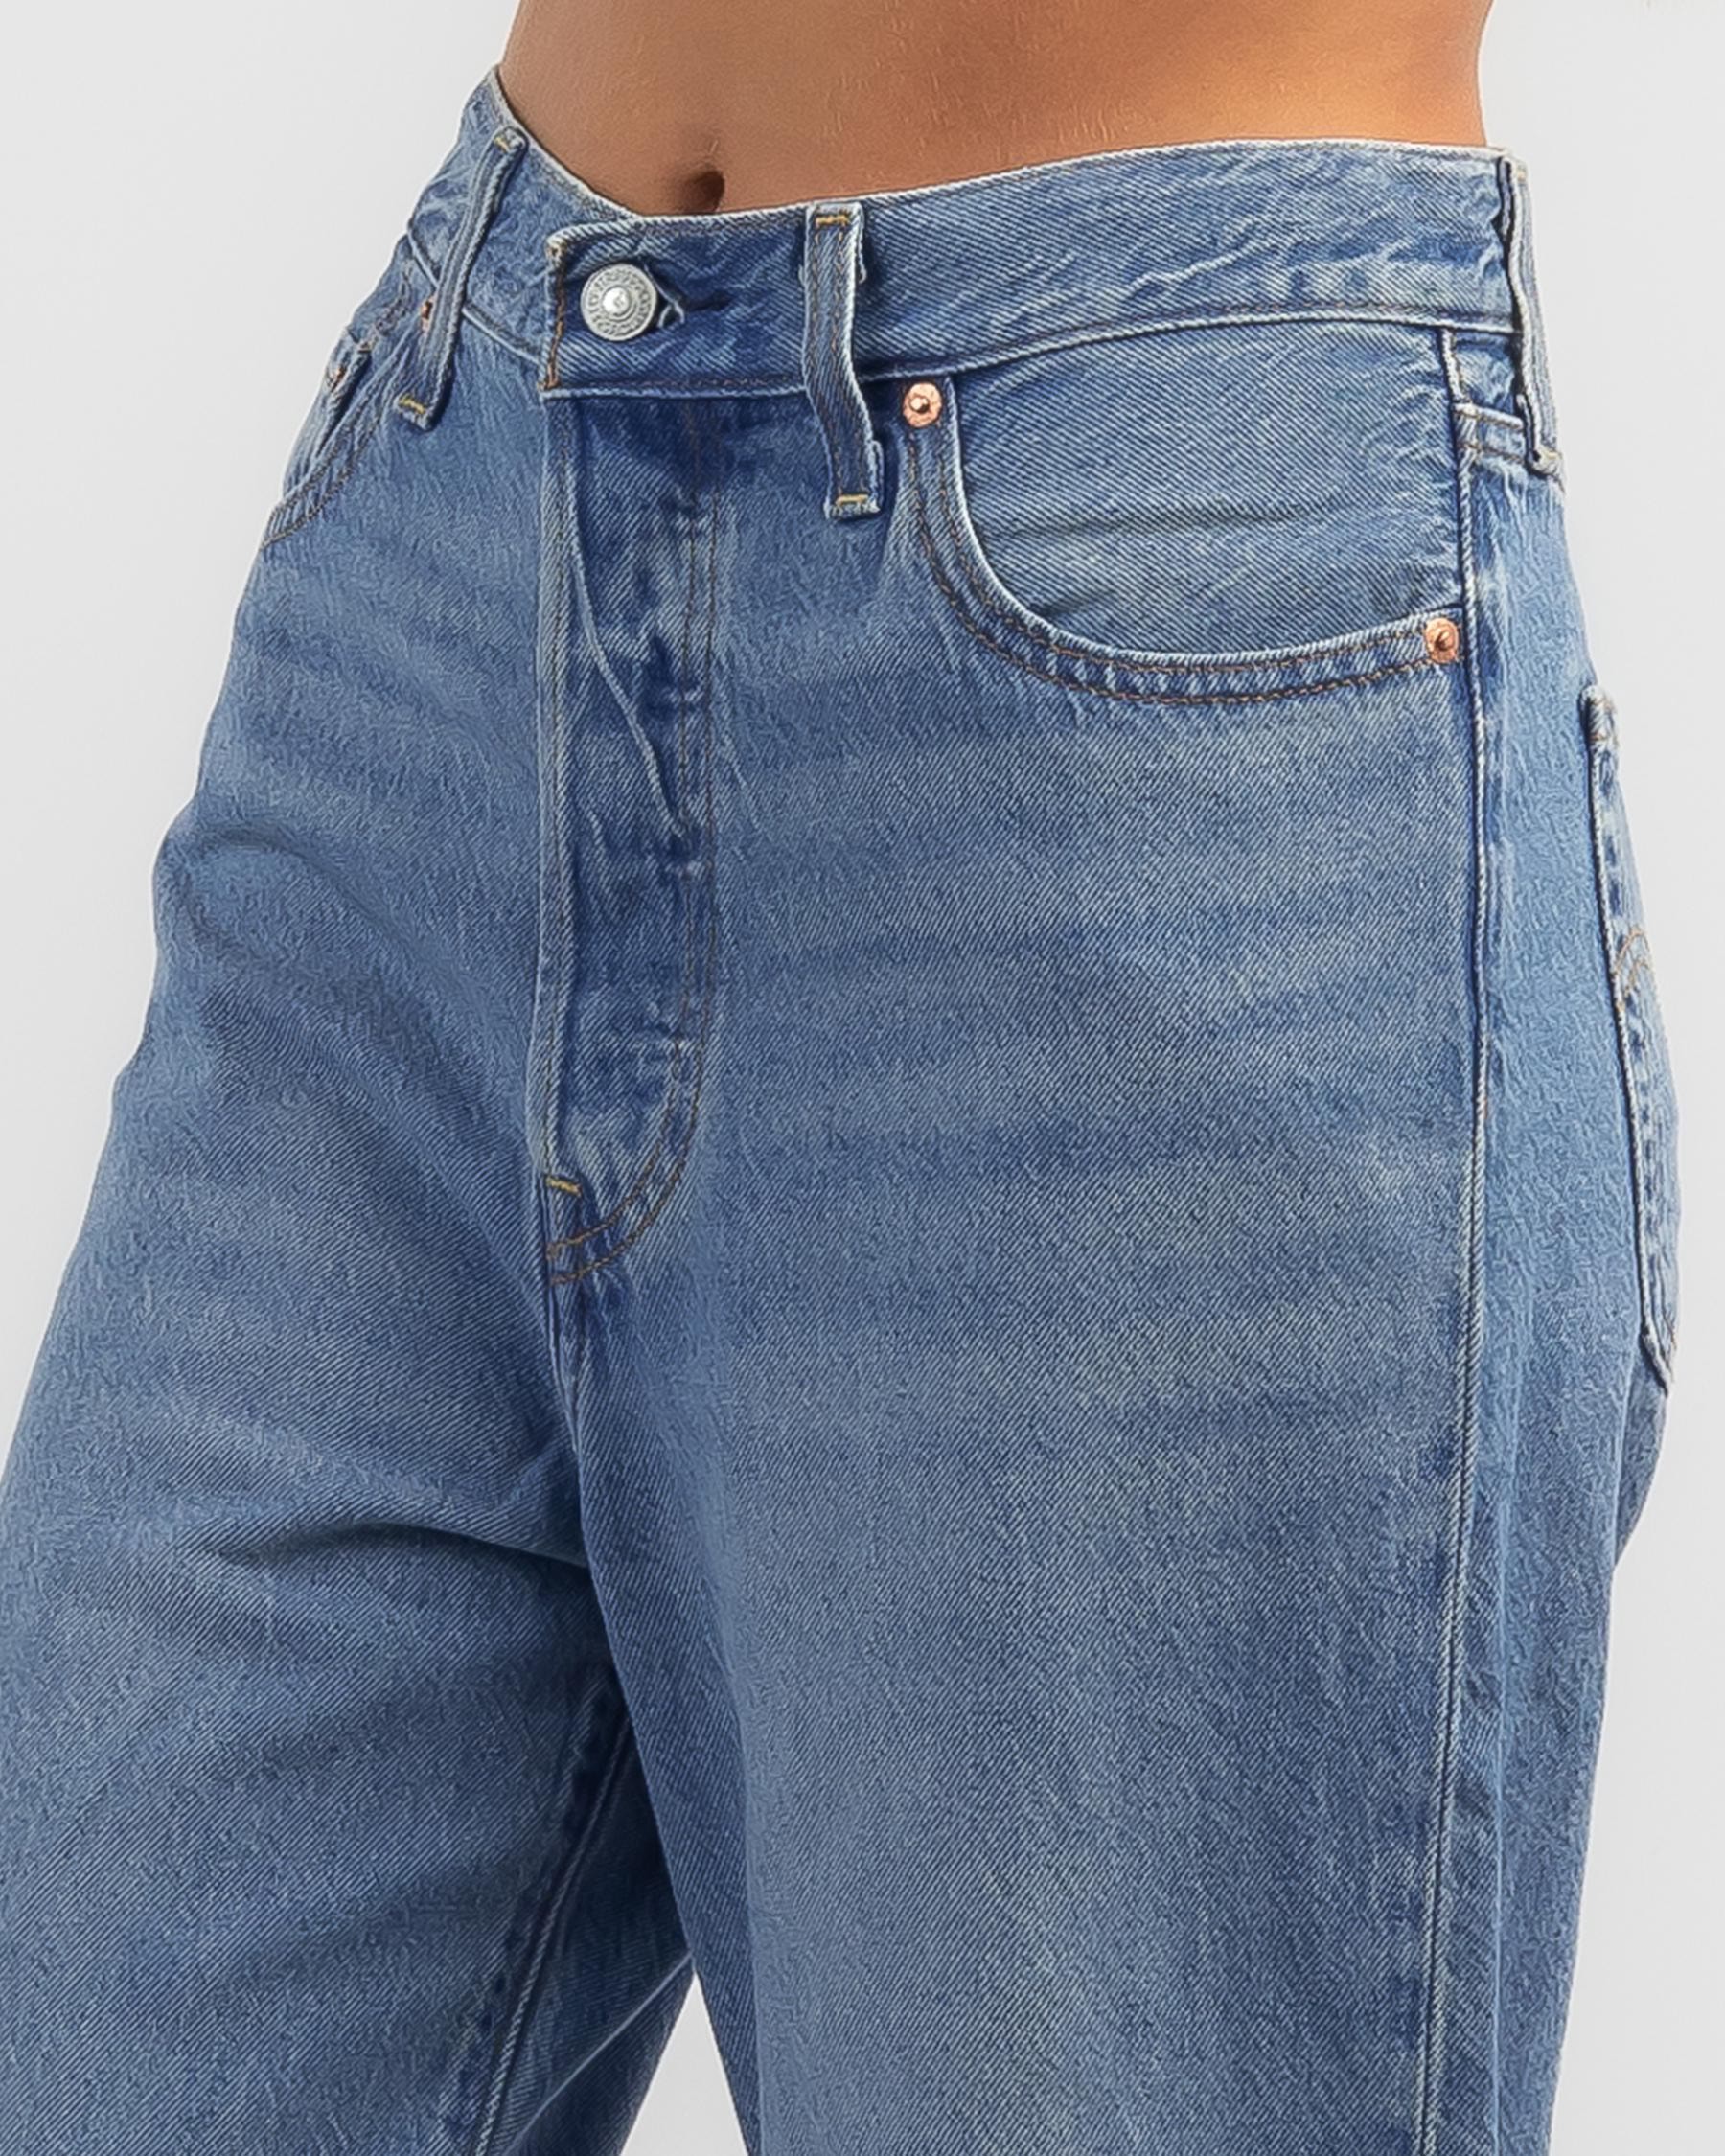 Levi's Ribcage Jeans In In The Middle - Fast Shipping & Easy Returns ...